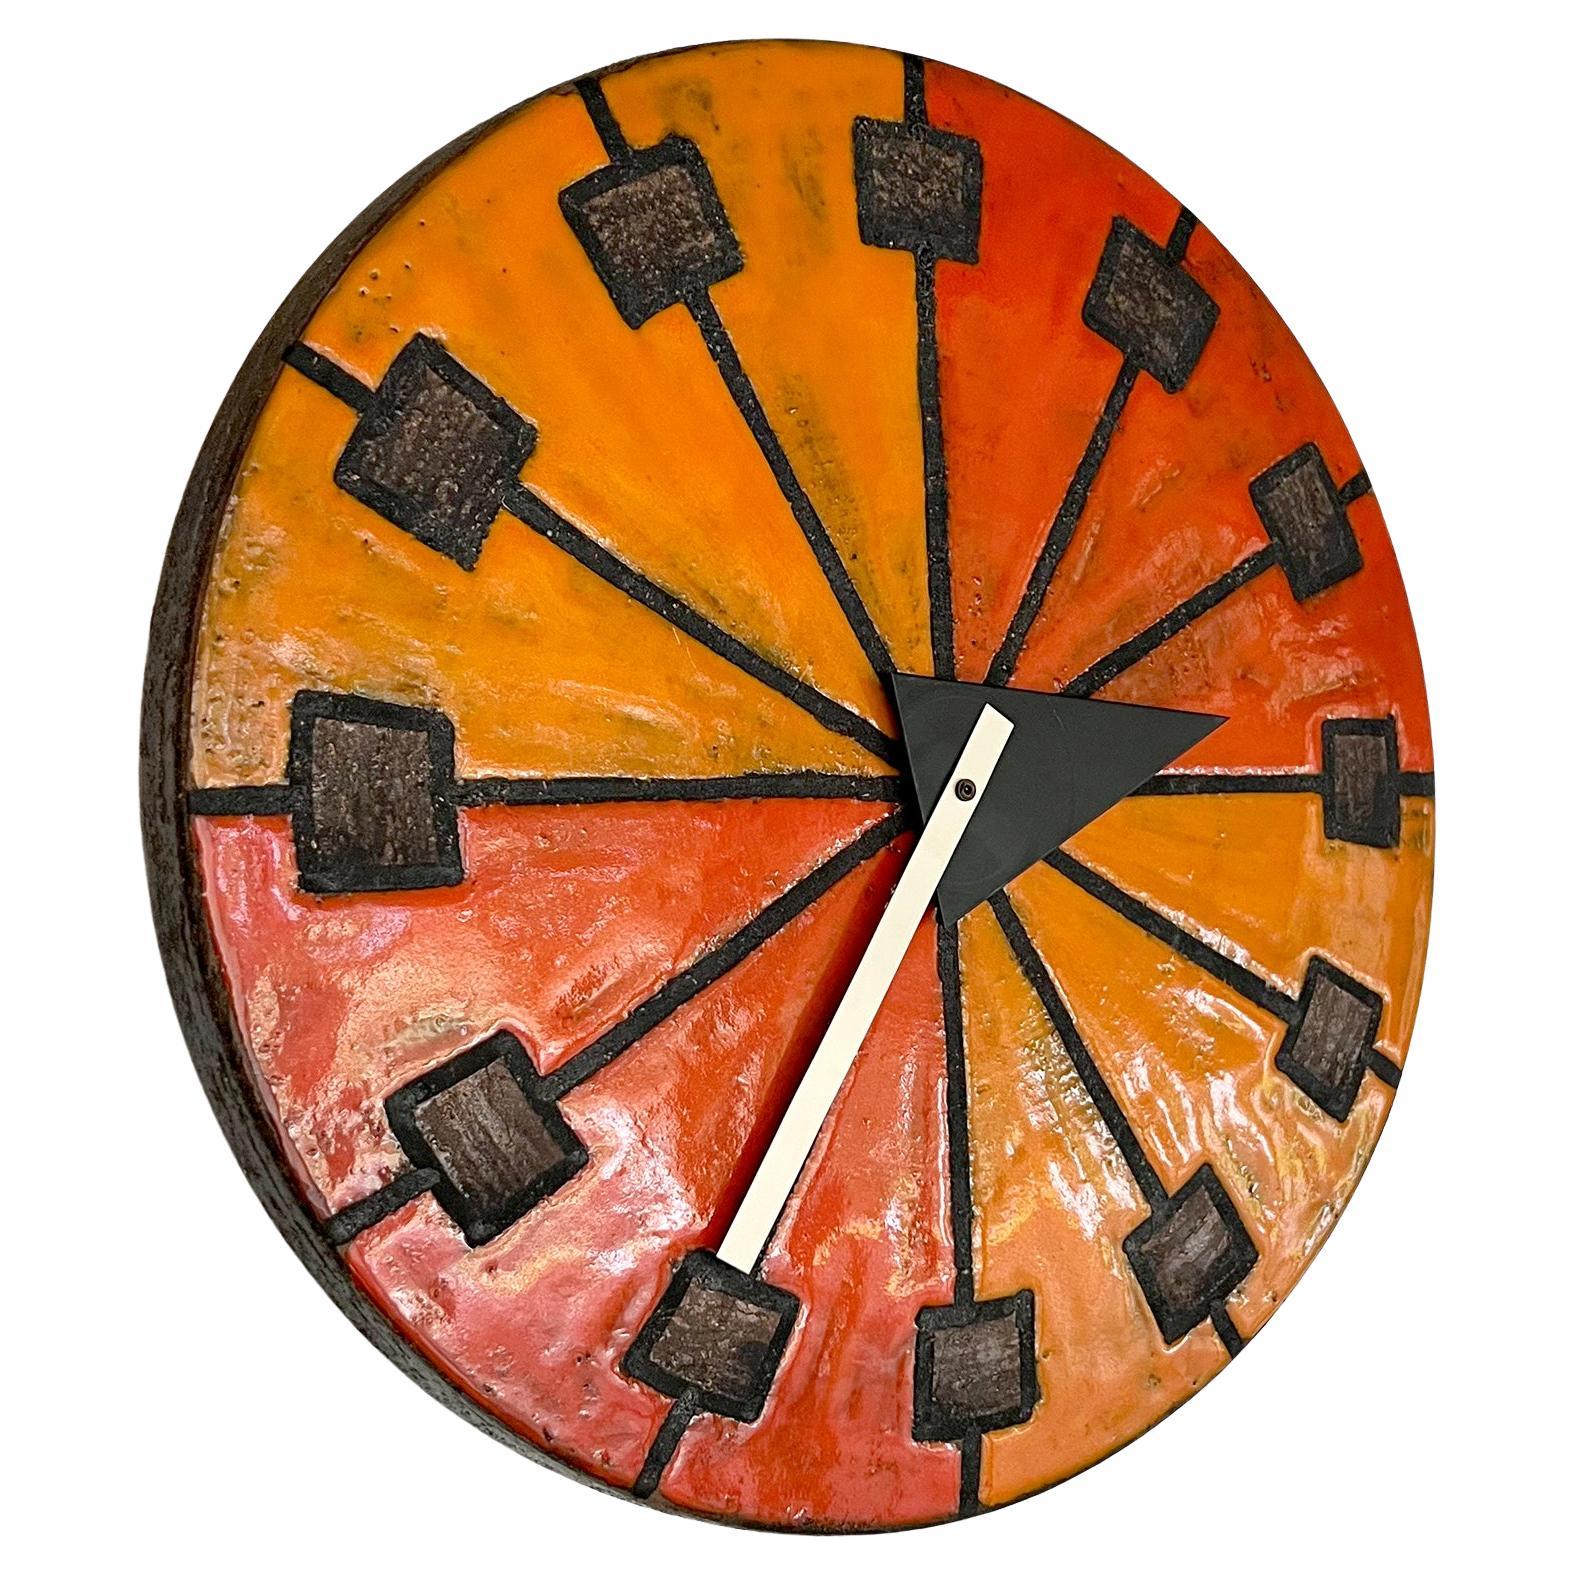 Howard Miller Meridian clock in shades of red/orange and golden yellow glazes over chamotte clay body, circa 1960s. Clock measures 14